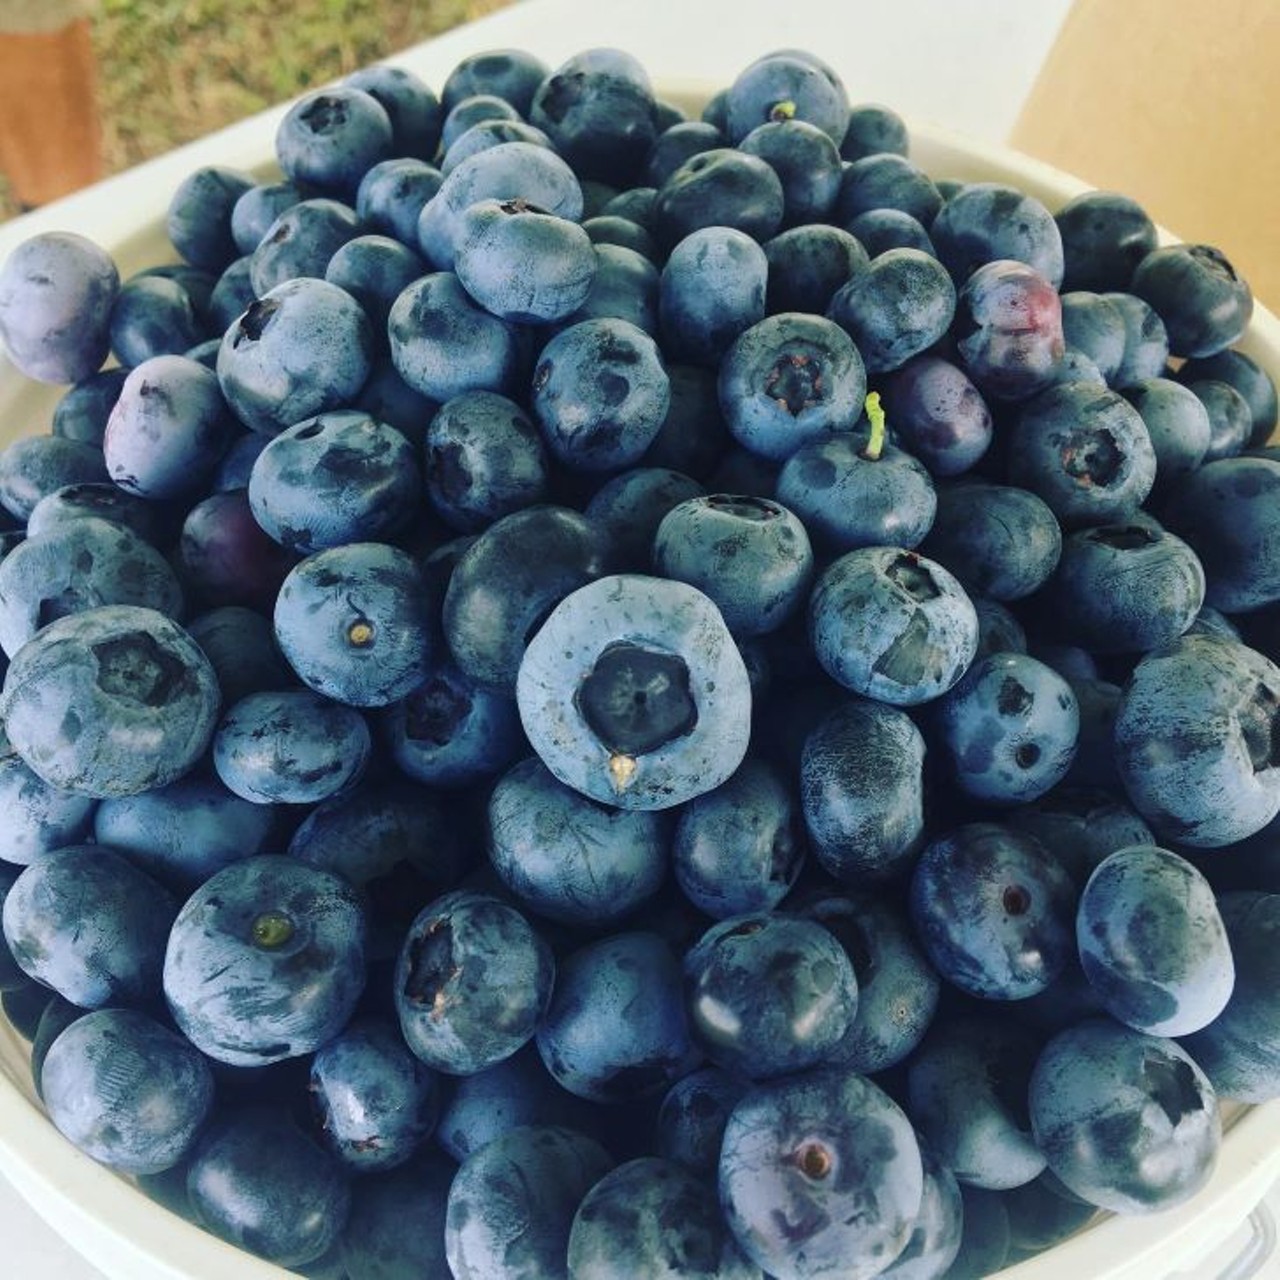 Beck Brothers&#146; Blueberries 
12500 Overstreet Road, Windermere
Though closed until April this year, Beck&#146;s is a popular U-Pick choice. You can pick up plenty of sweet berries, as well as some local honey while you&#146;re there.
Photo via Beck Brothers&#146; Blueberries/Facebook